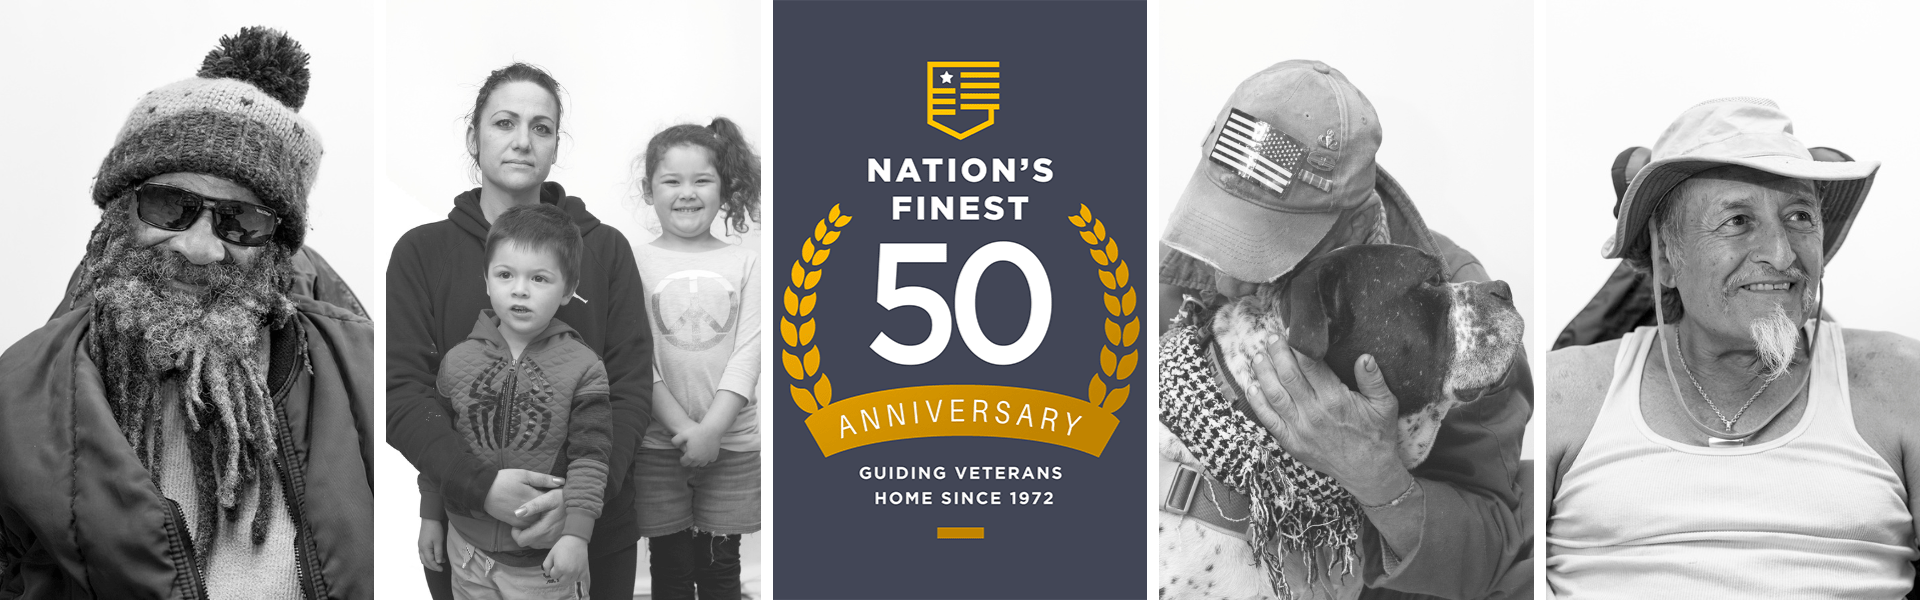 Nation's Finest 50th Anniversary logos with black and white veteran photos